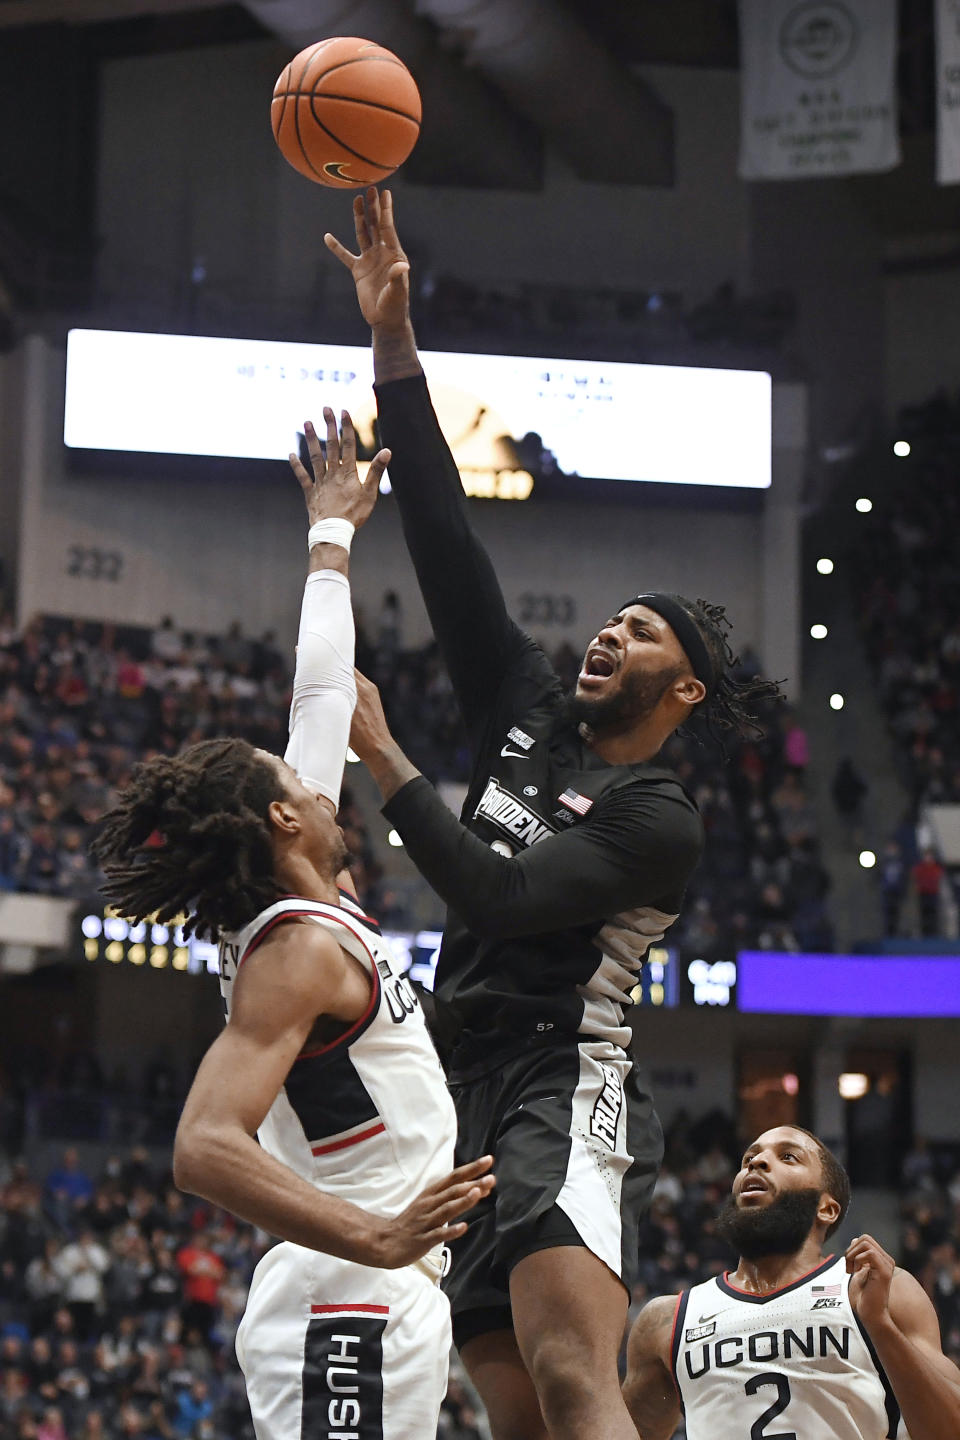 Providence's Nate Watson, right, makes a basket over Connecticut's Isaiah Whaley in the second half of an NCAA college basketball game, Saturday, Dec. 18, 2021, in Hartford, Conn. (AP Photo/Jessica Hill)